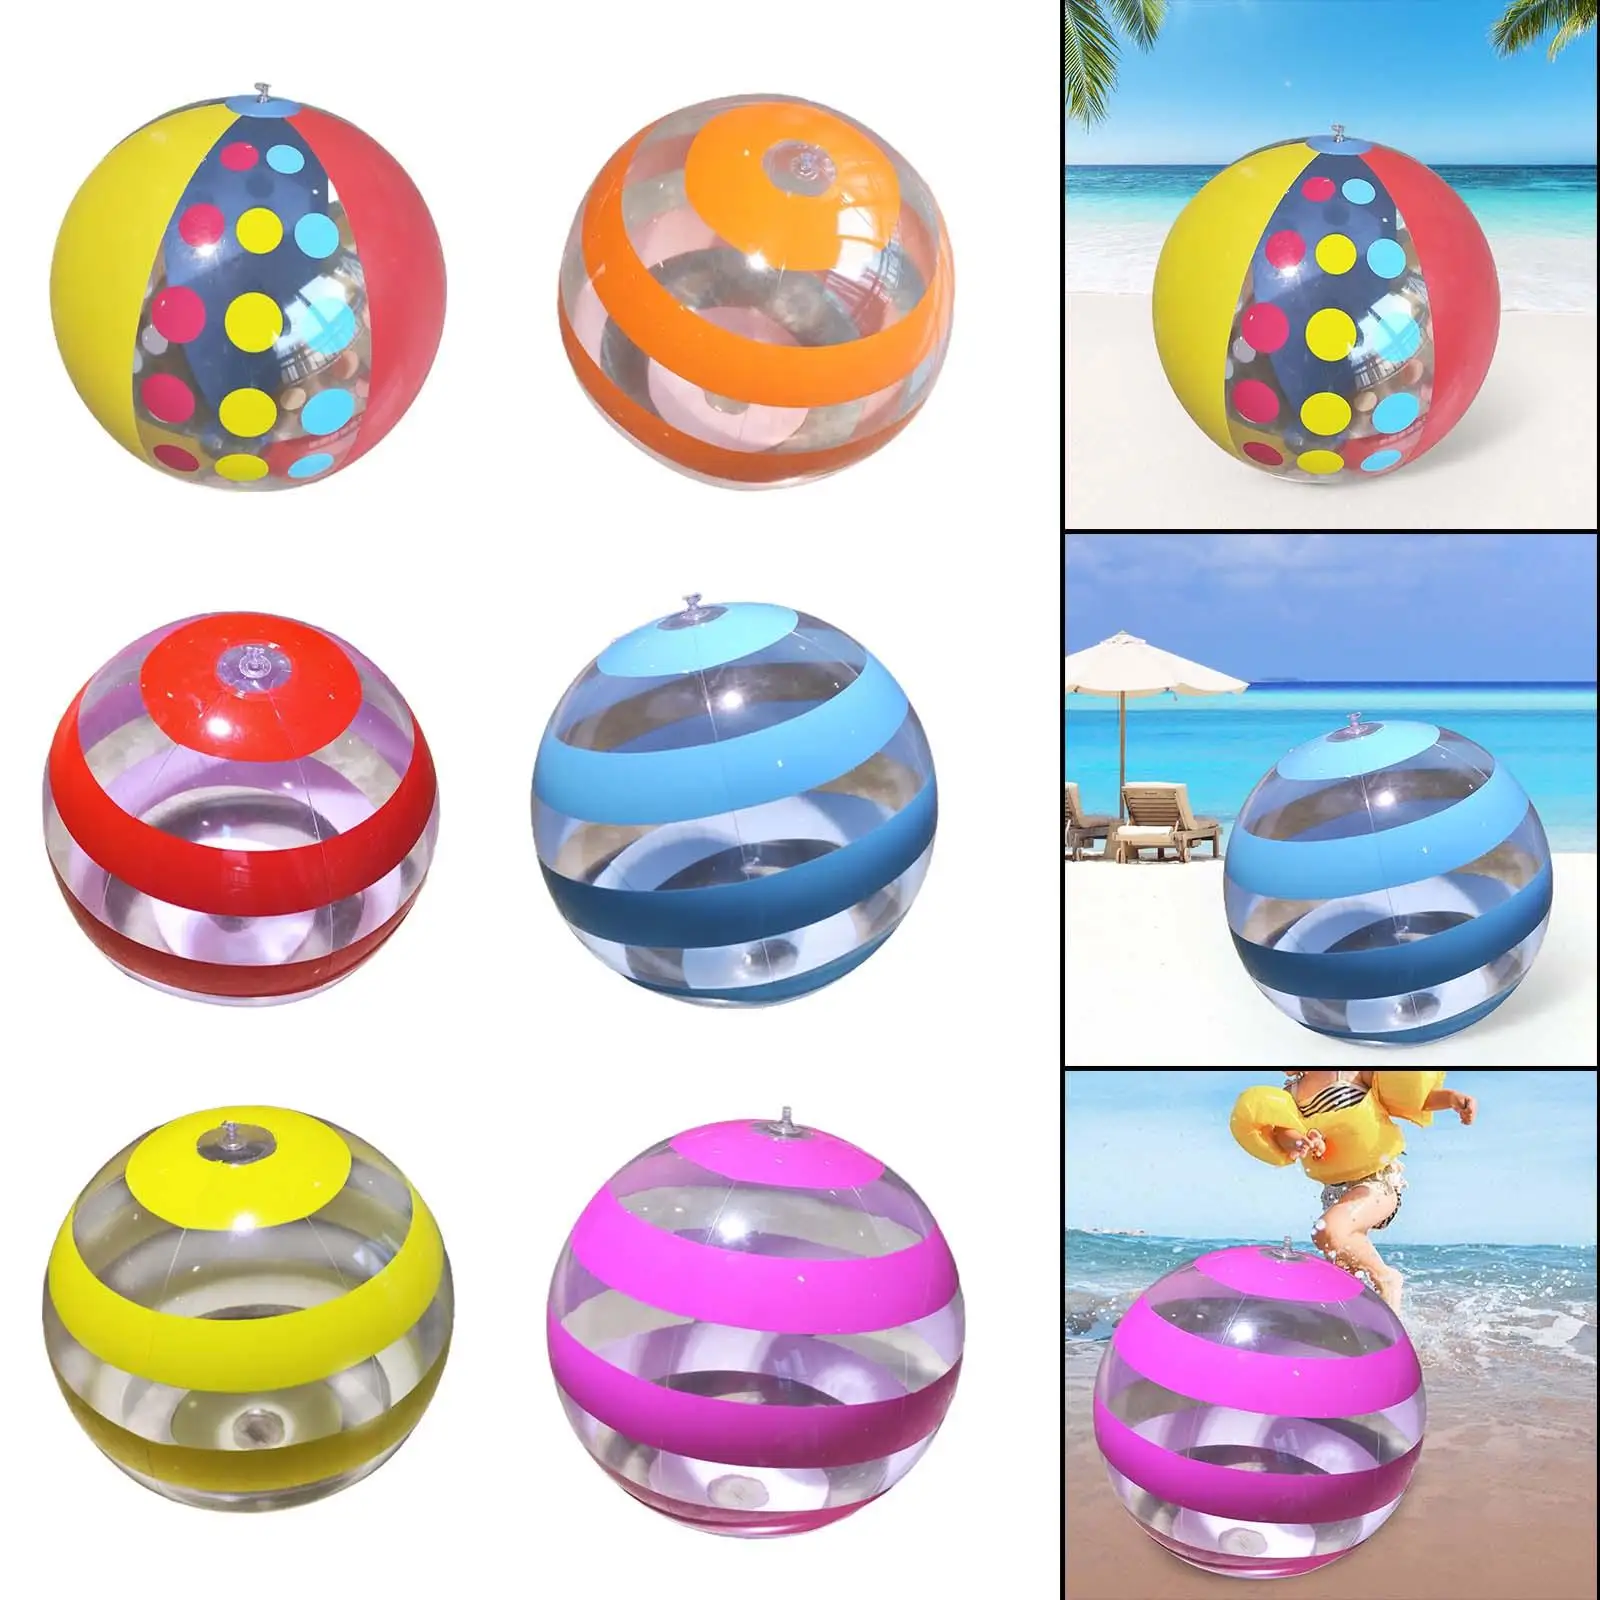 Swimming Pool Balls Pool Game Leakproof Party Favor PVC Summer Water Games for Beach Hawaiian Theme Party Holiday Lake Home